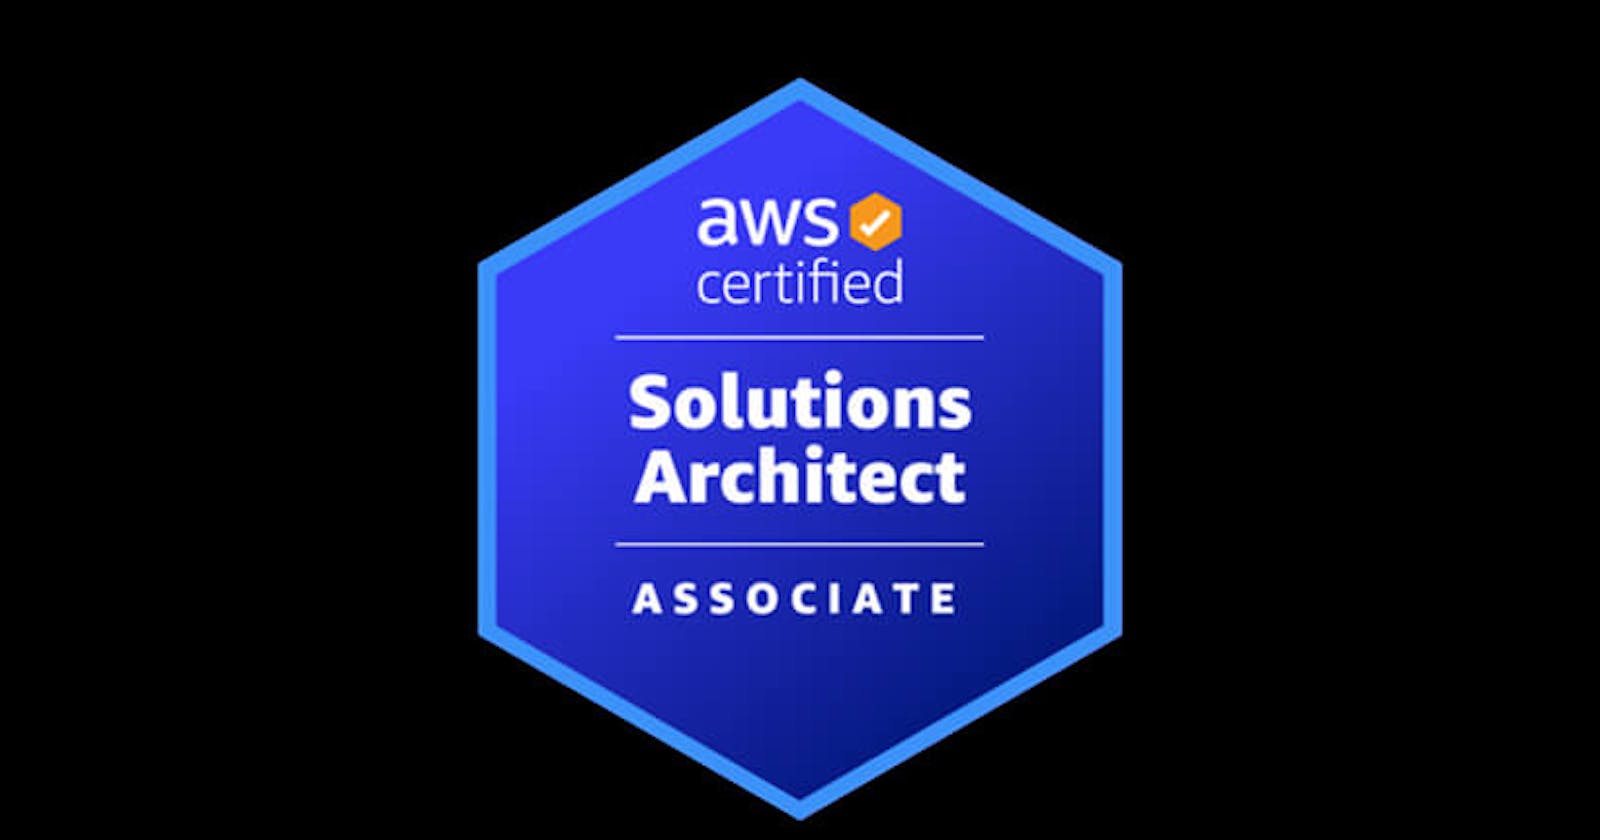 Day-01: AWS Certified Solutions Architect Associate